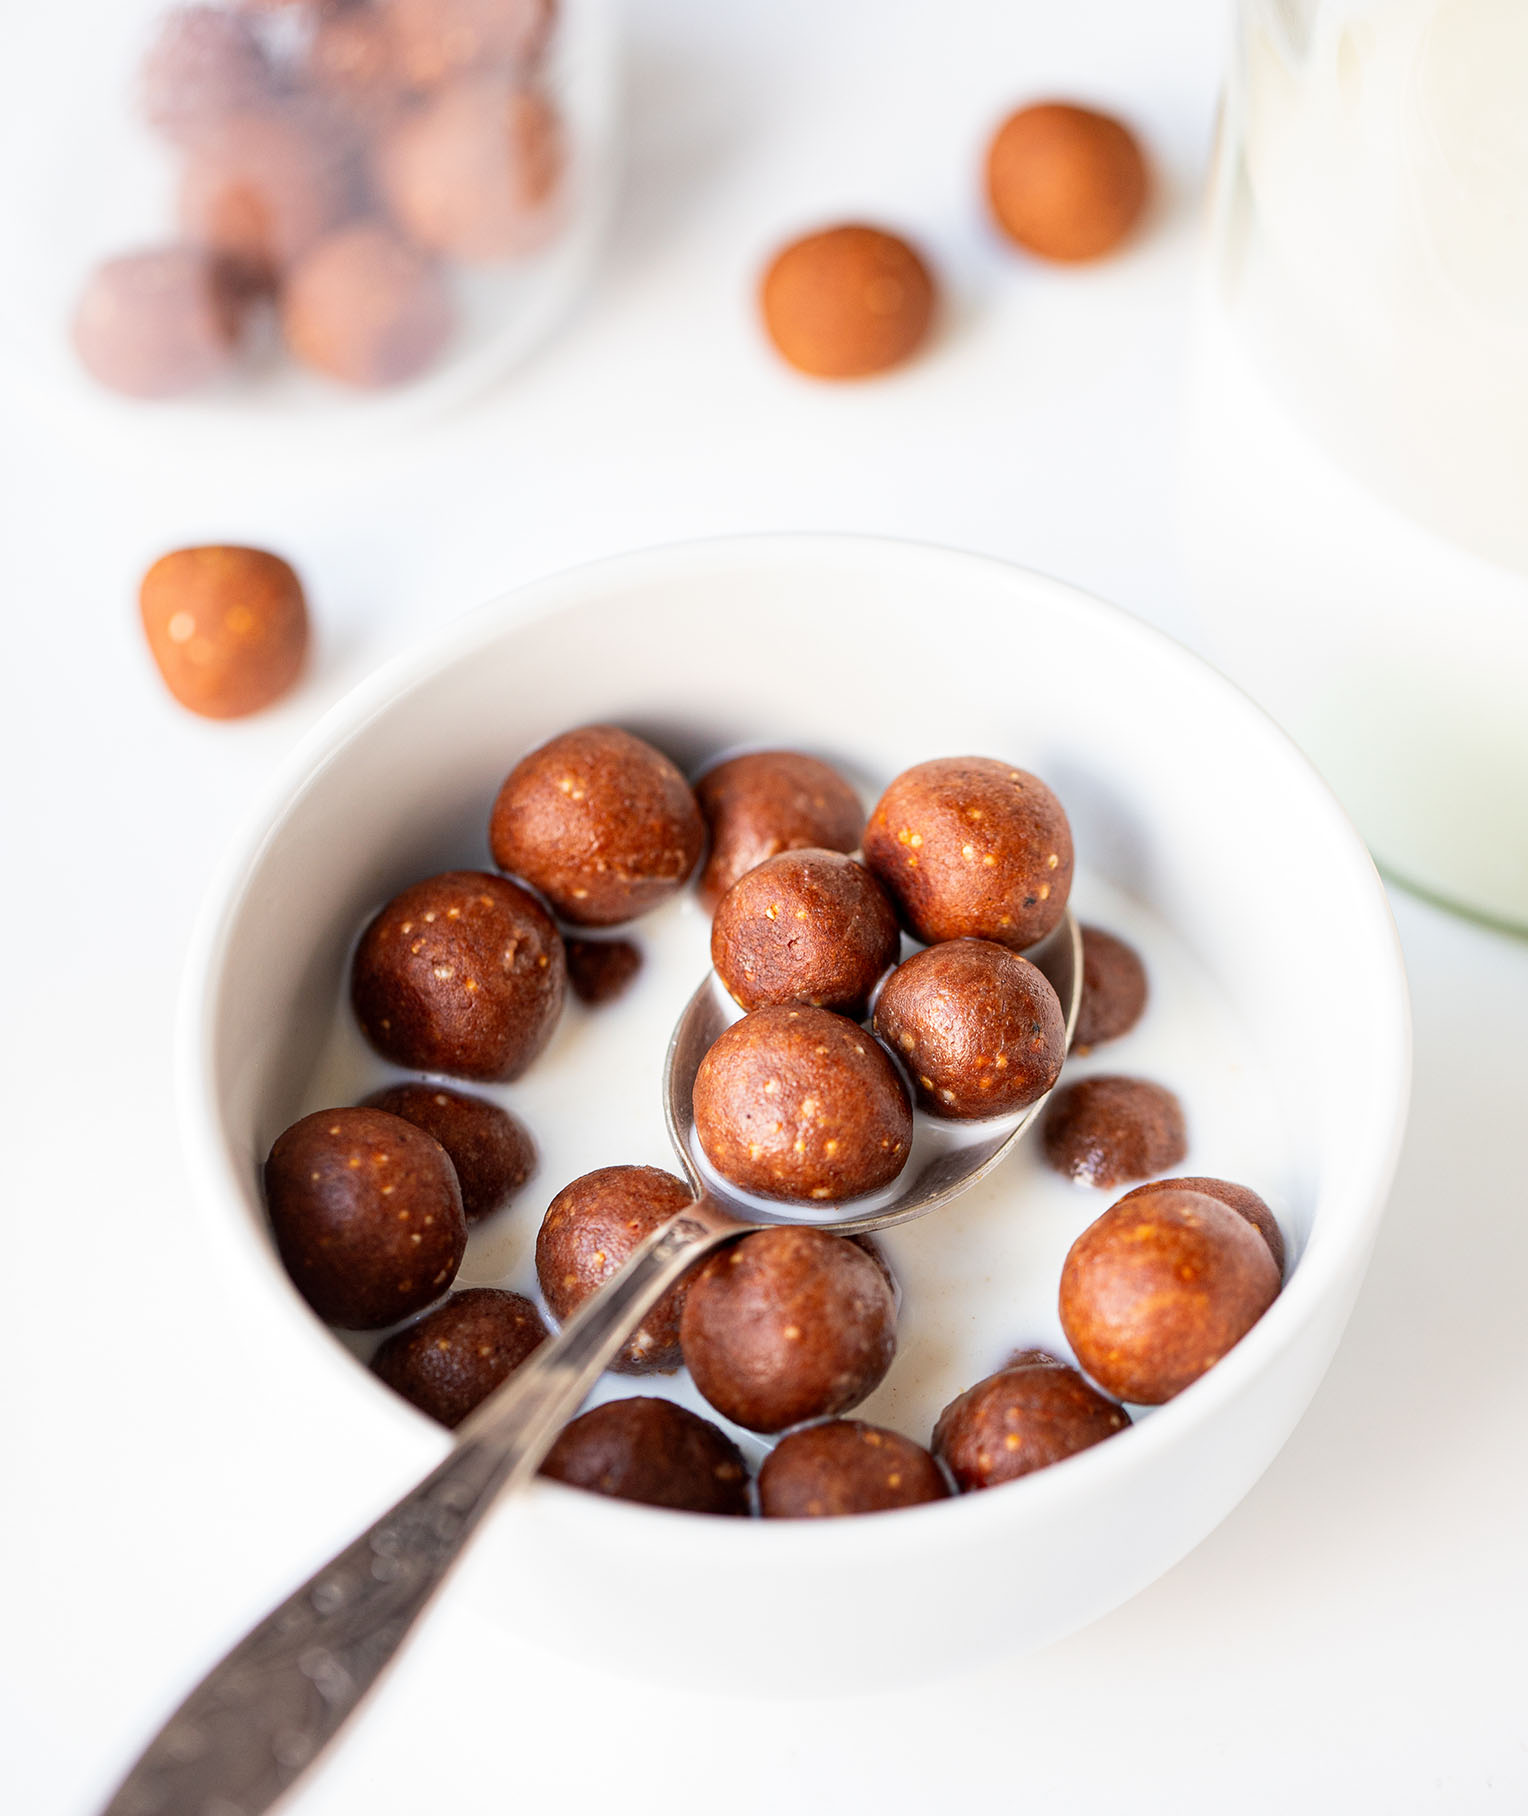 Homemade Chocolate Cereal (Cocoa Puffs)